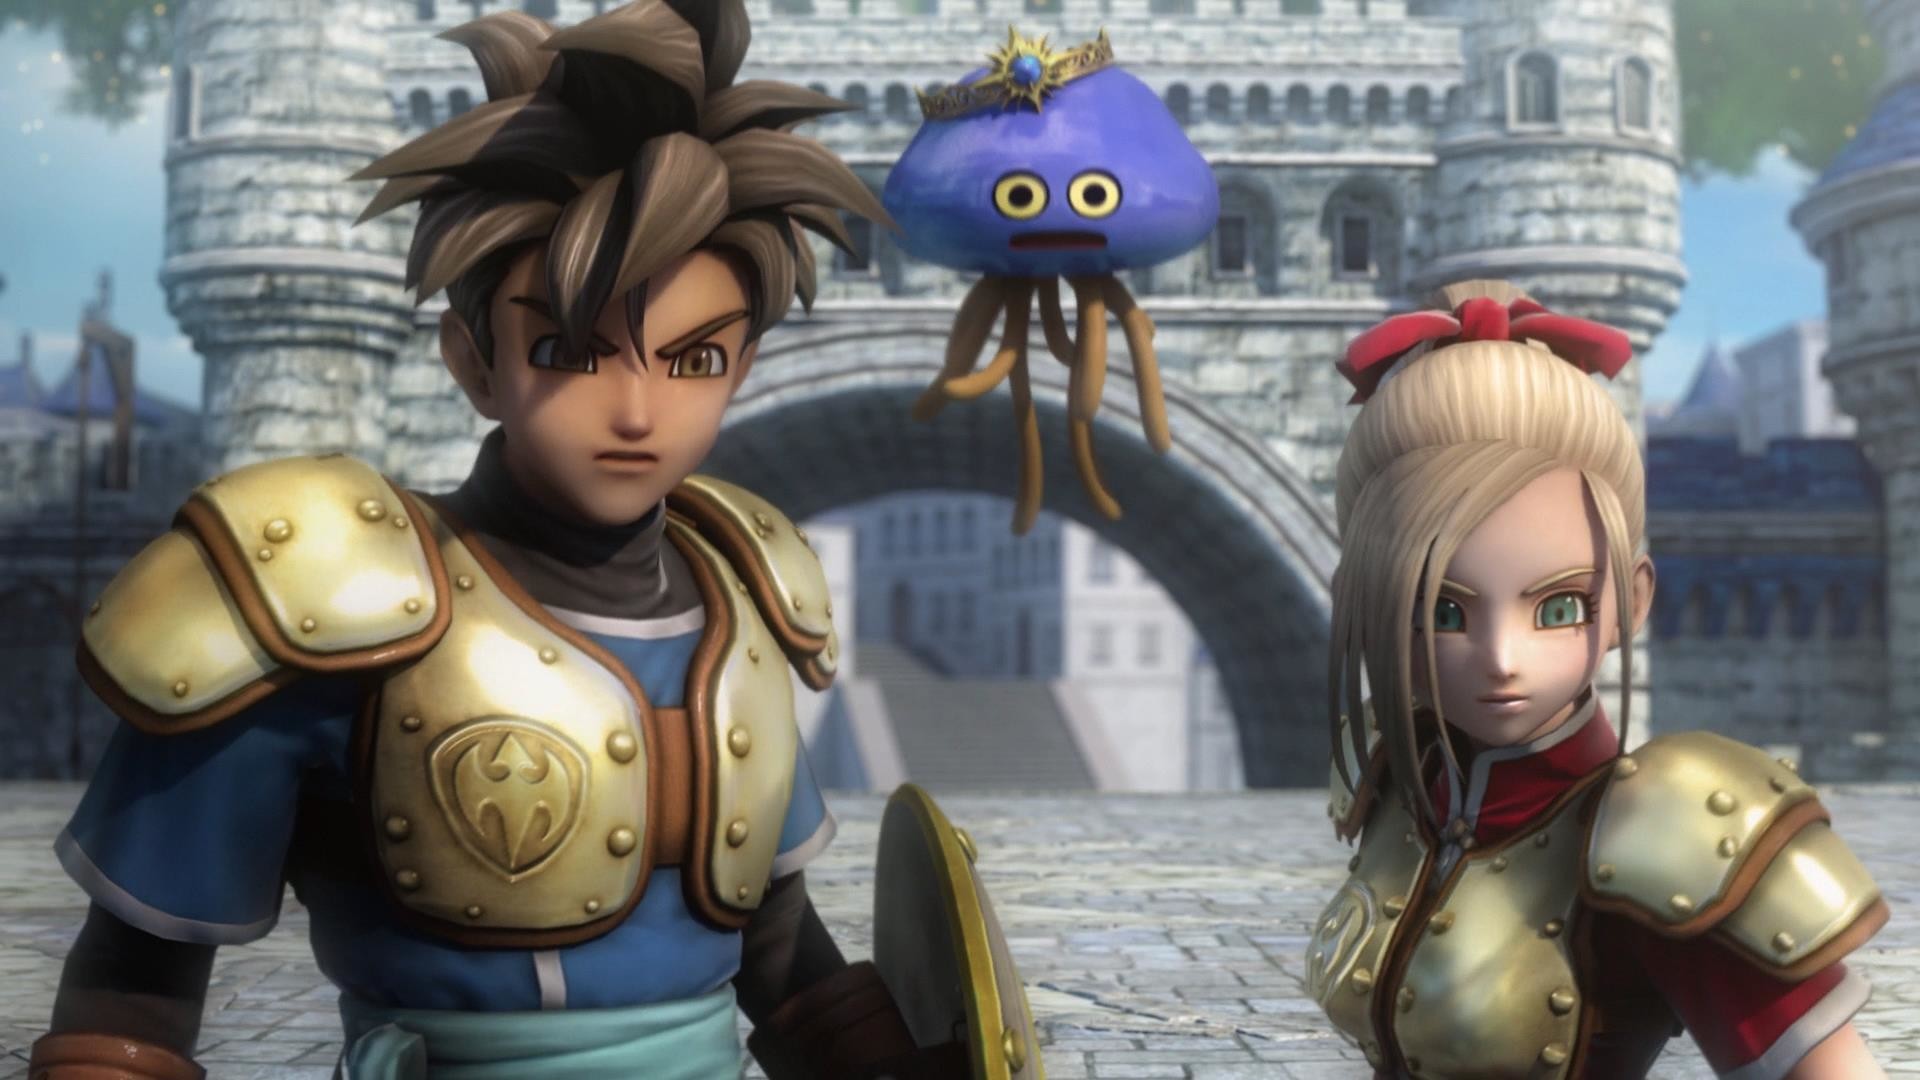 1920x1080 Dragon Quest Heroes HD Wallpaper | Background Image |  | ID:630541  - Wallpaper Abyss